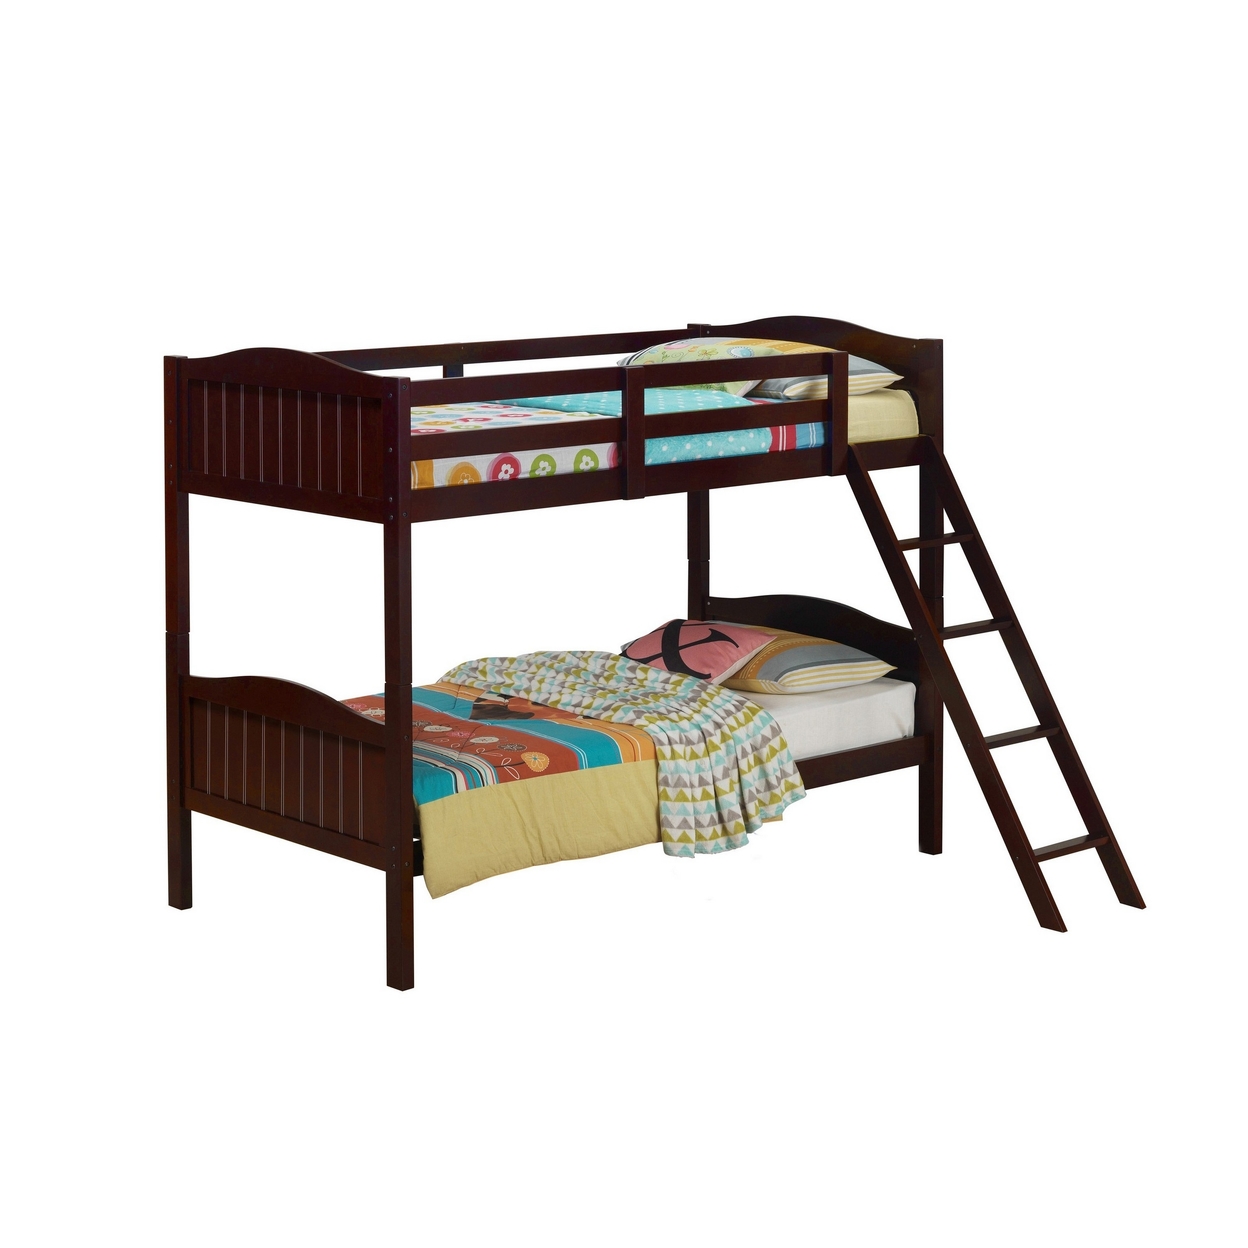 Mok Wood Twin Bunk Bed With Ladder And Guardrail, Farm Plank Style, Brown- Saltoro Sherpi